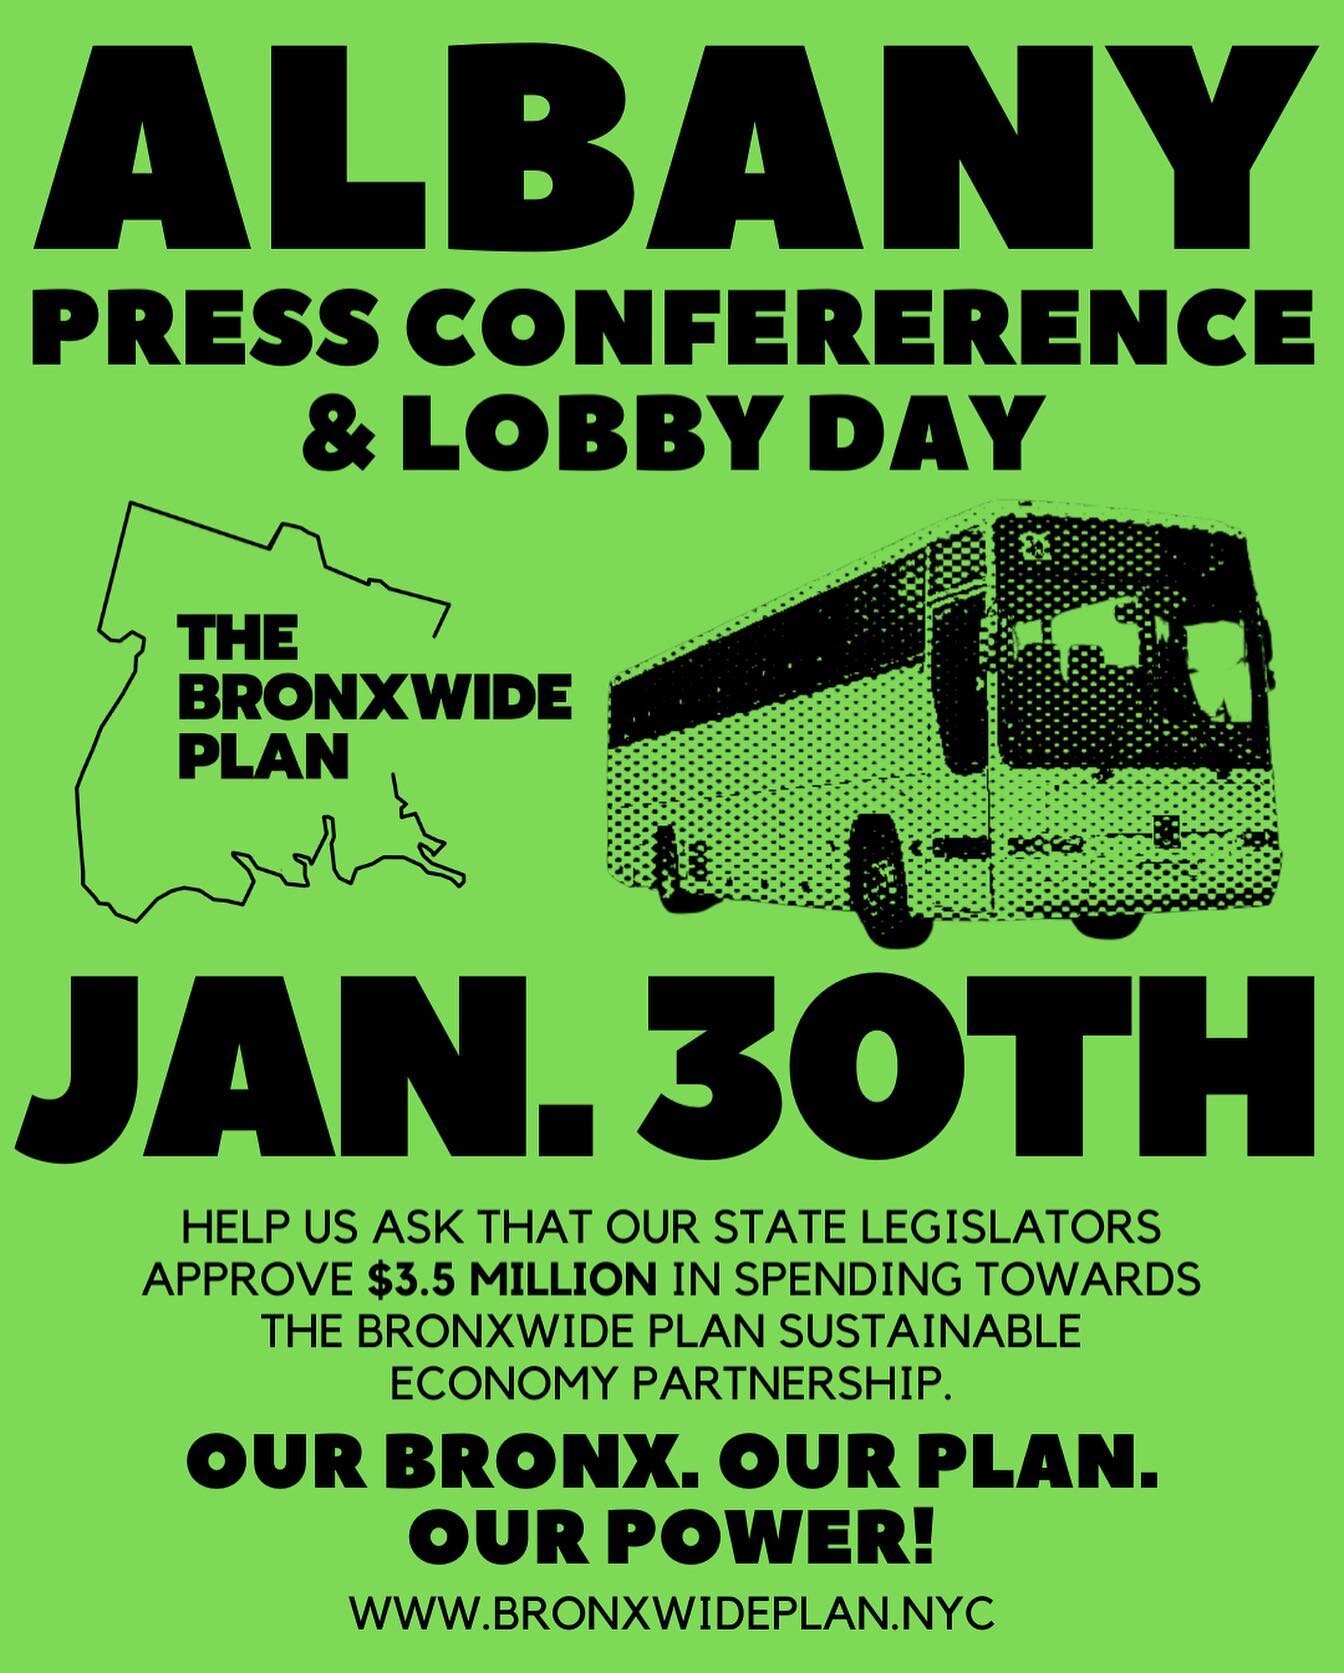 A shared Bronx economy depends critically on NY State climate funding.

That&rsquo;s why we&rsquo;re heading to Albany tomorrow January 30th to advocate for The Bronxwide Plan Sustainable Economy Partnership!

✨🚌🍎🗽⚖️🏛️✨&nbsp;

#BronxwidePlan&nbsp